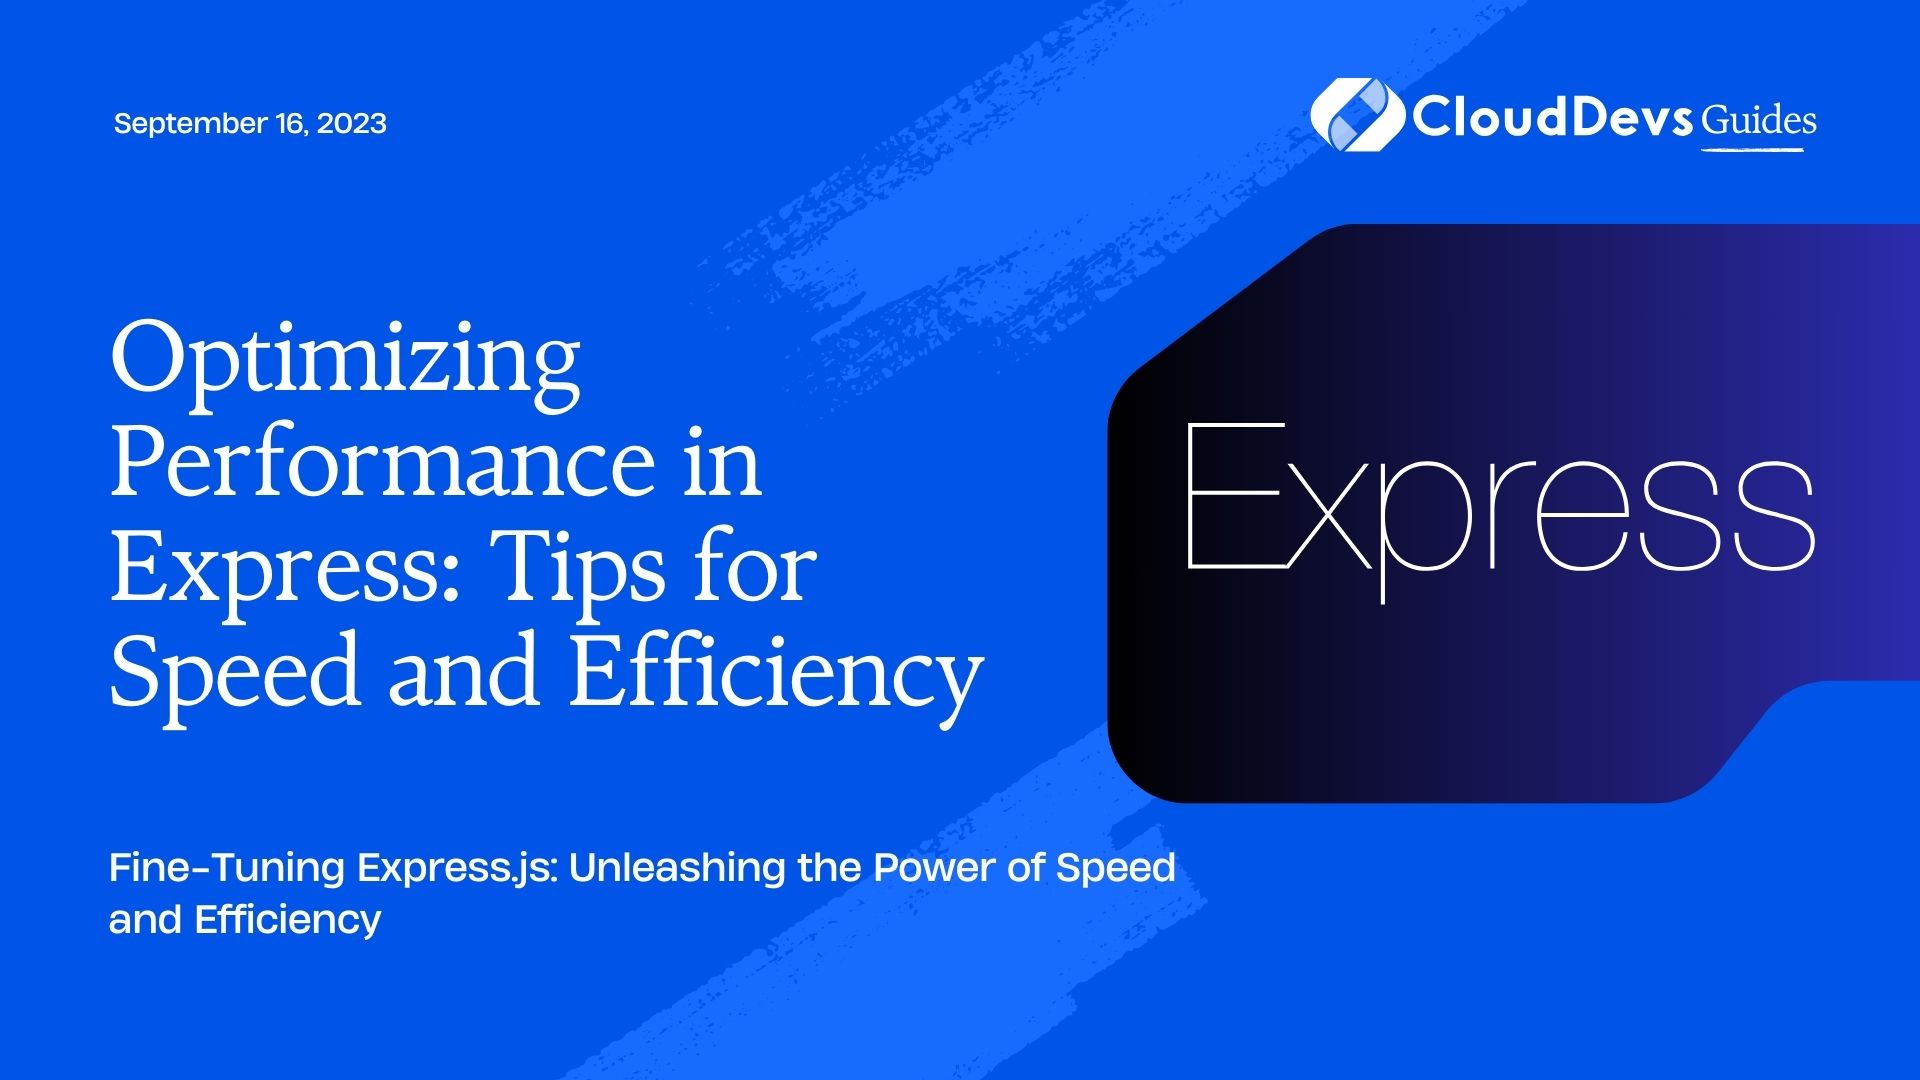 Optimizing Performance in Express: Tips for Speed and Efficiency